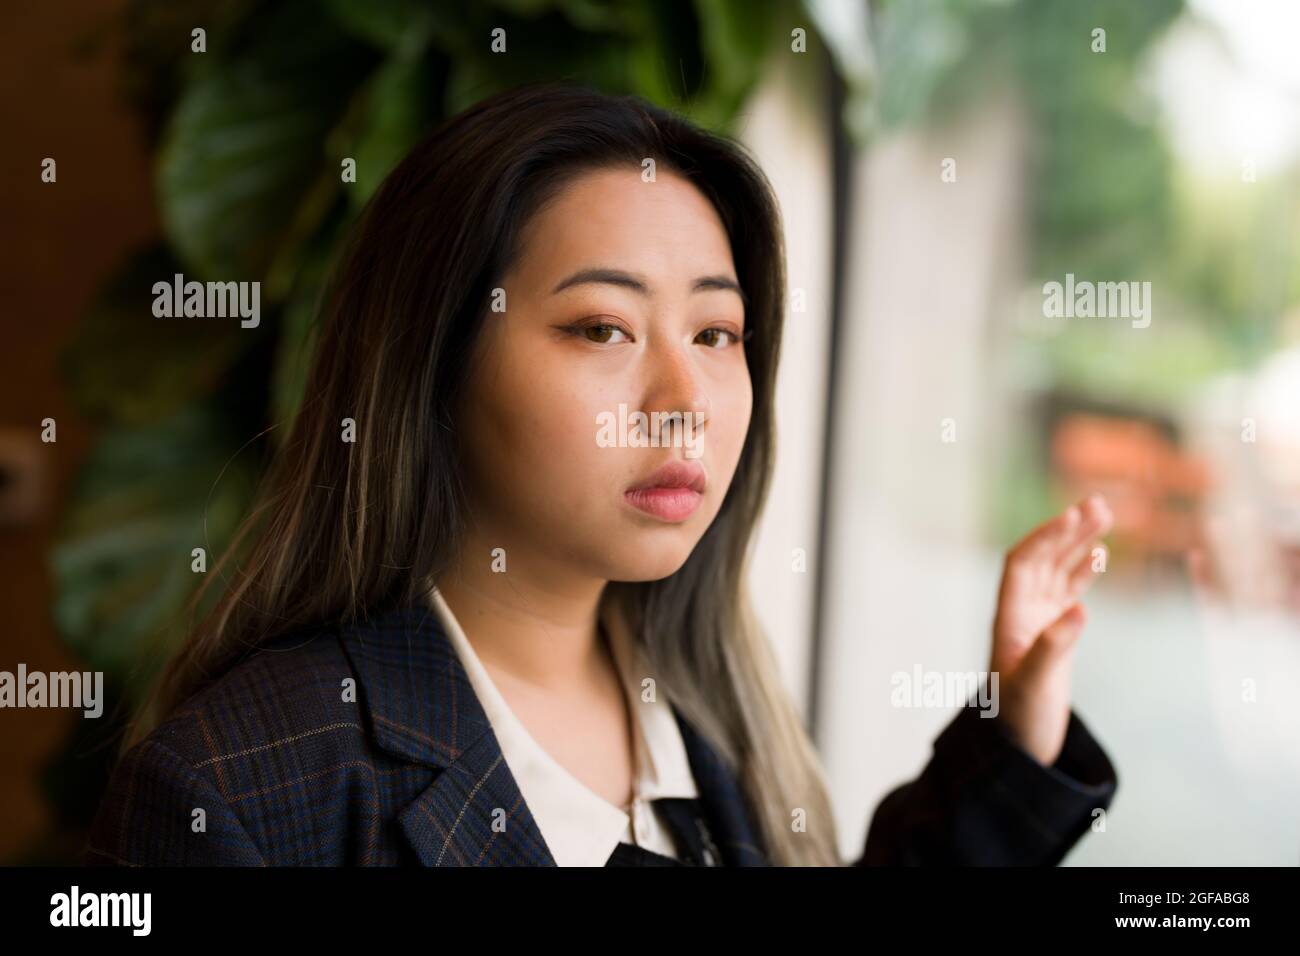 Young Asian Woman Office Worker / Data Scientist Looking Out Window Stock Photo